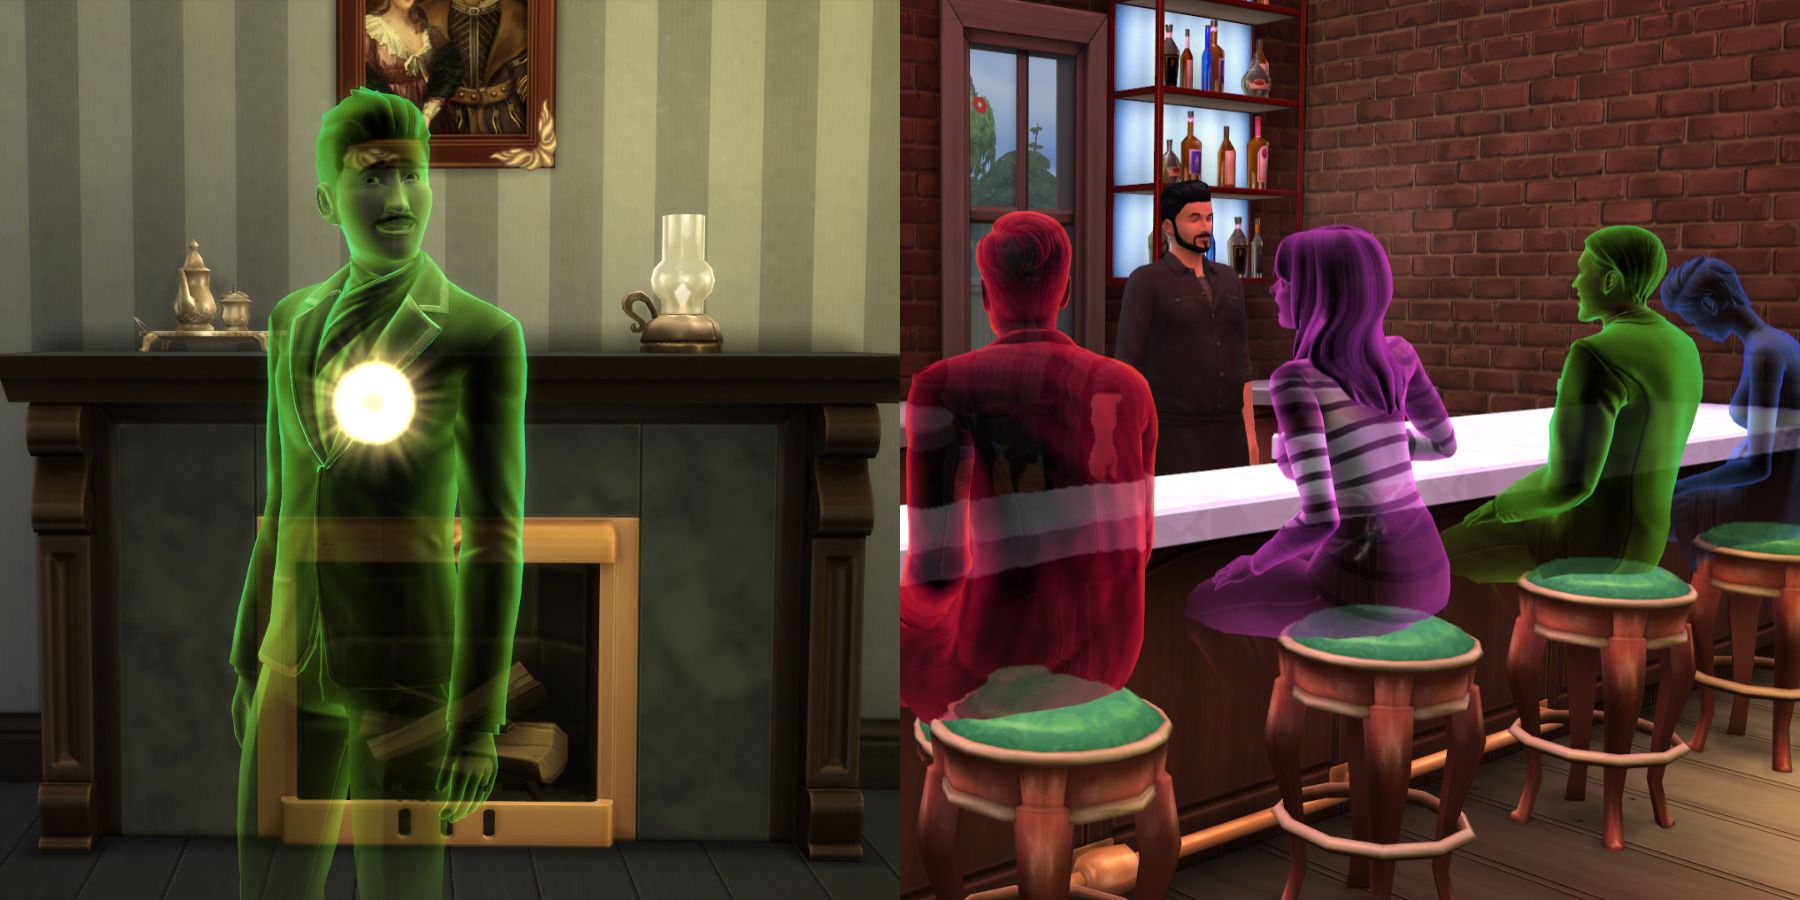 The Sims 4 ghosts feature split image vampire ghost and ghosts in a bar